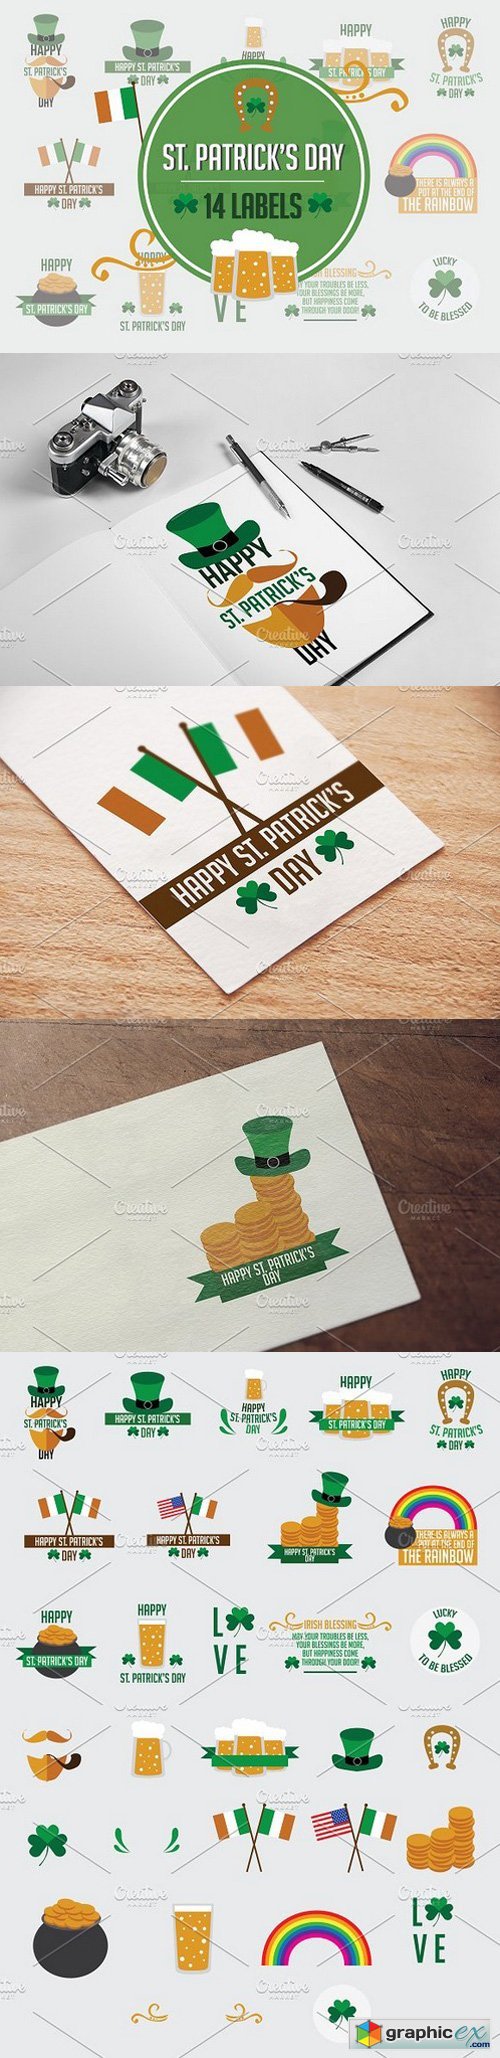 14 Labels: St. Patrick's Day